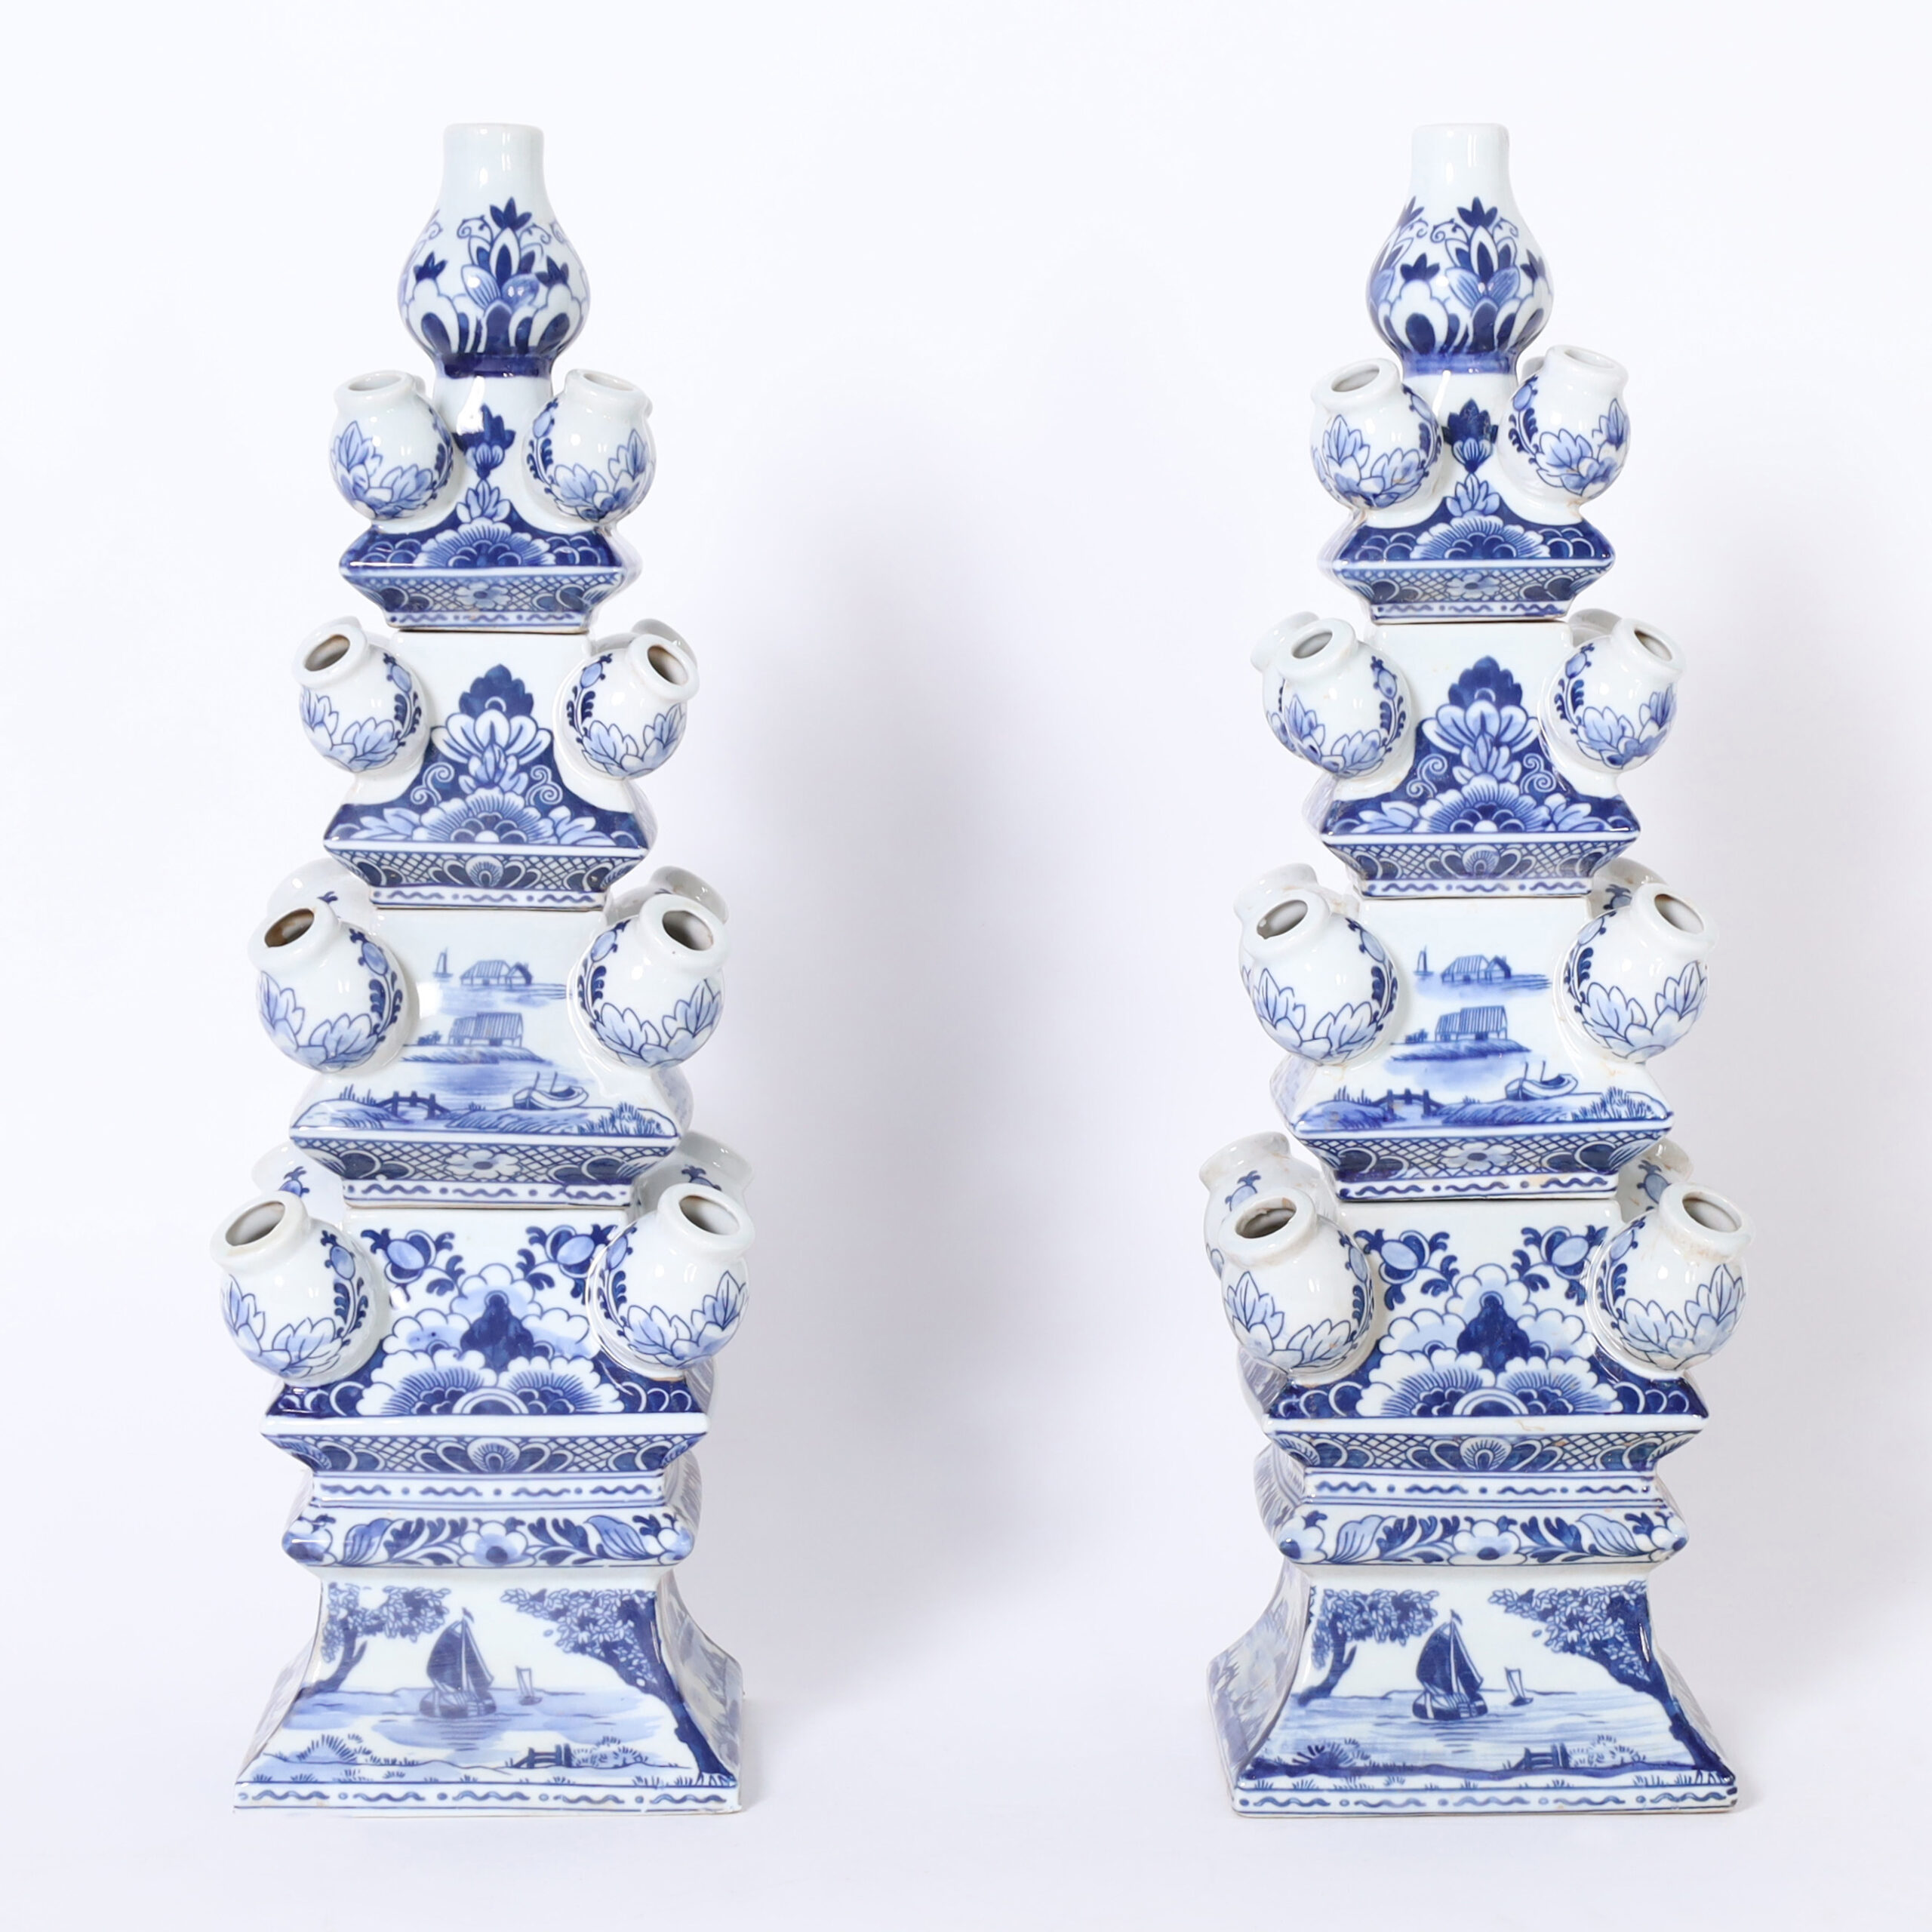 Pair of Chinese Blue and White Porcelain Tulipiere Towers